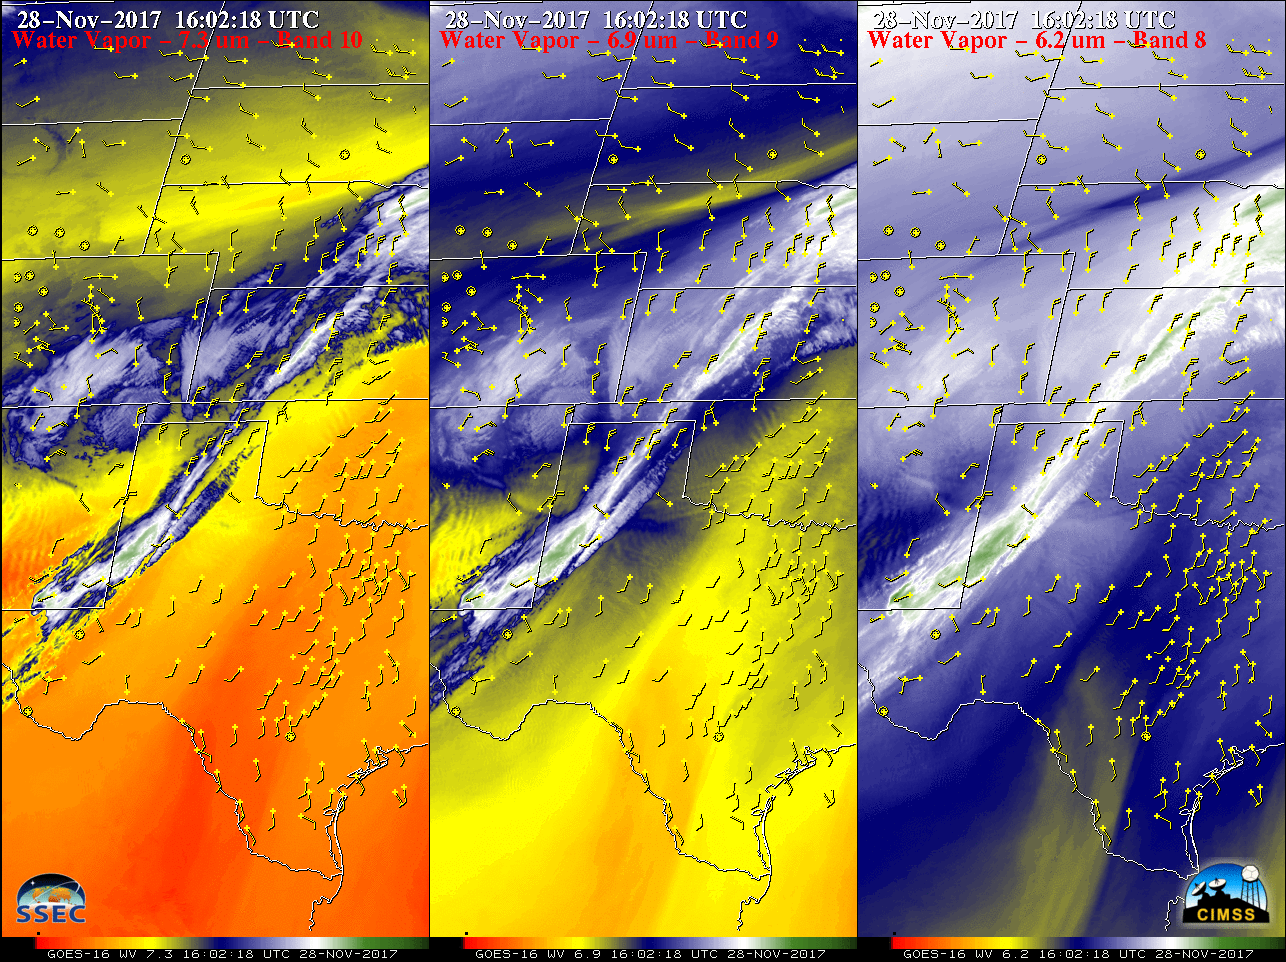 GOES-16 Lower-level (7.3 µm, left), Mid-level (6.9 µm, center) and Upper-level (6.2 µm, right) Water Vapor images, with hourly surface wind barbs plotted in yellow [click to play MP4 animation]